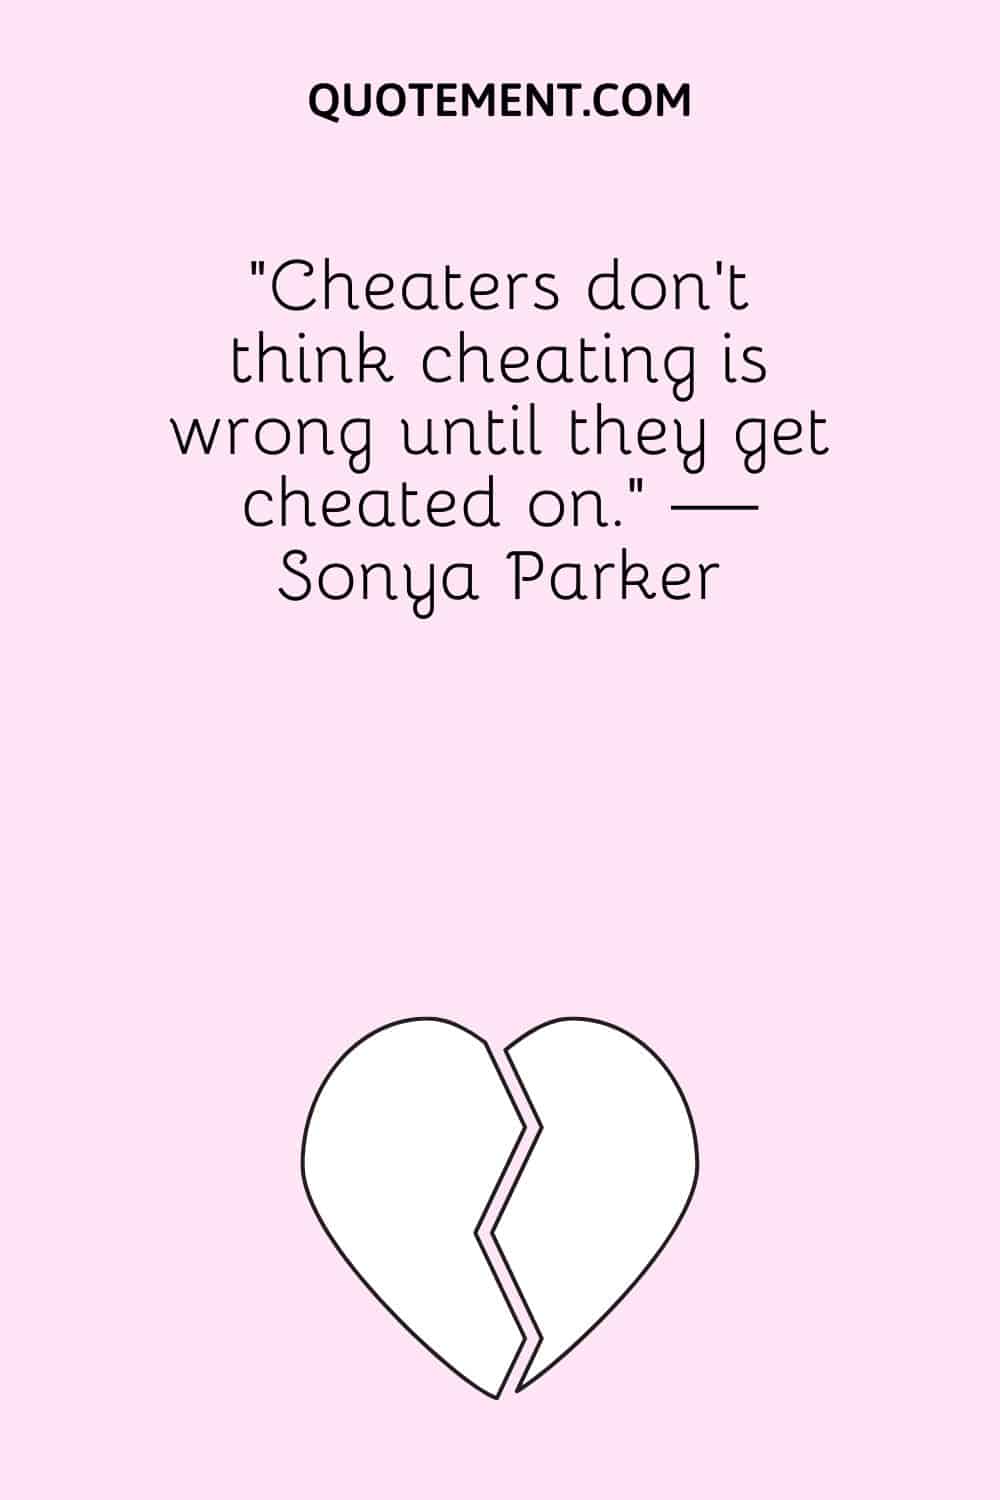 “Cheaters don’t think cheating is wrong until they get cheated on.” — Sonya Parker